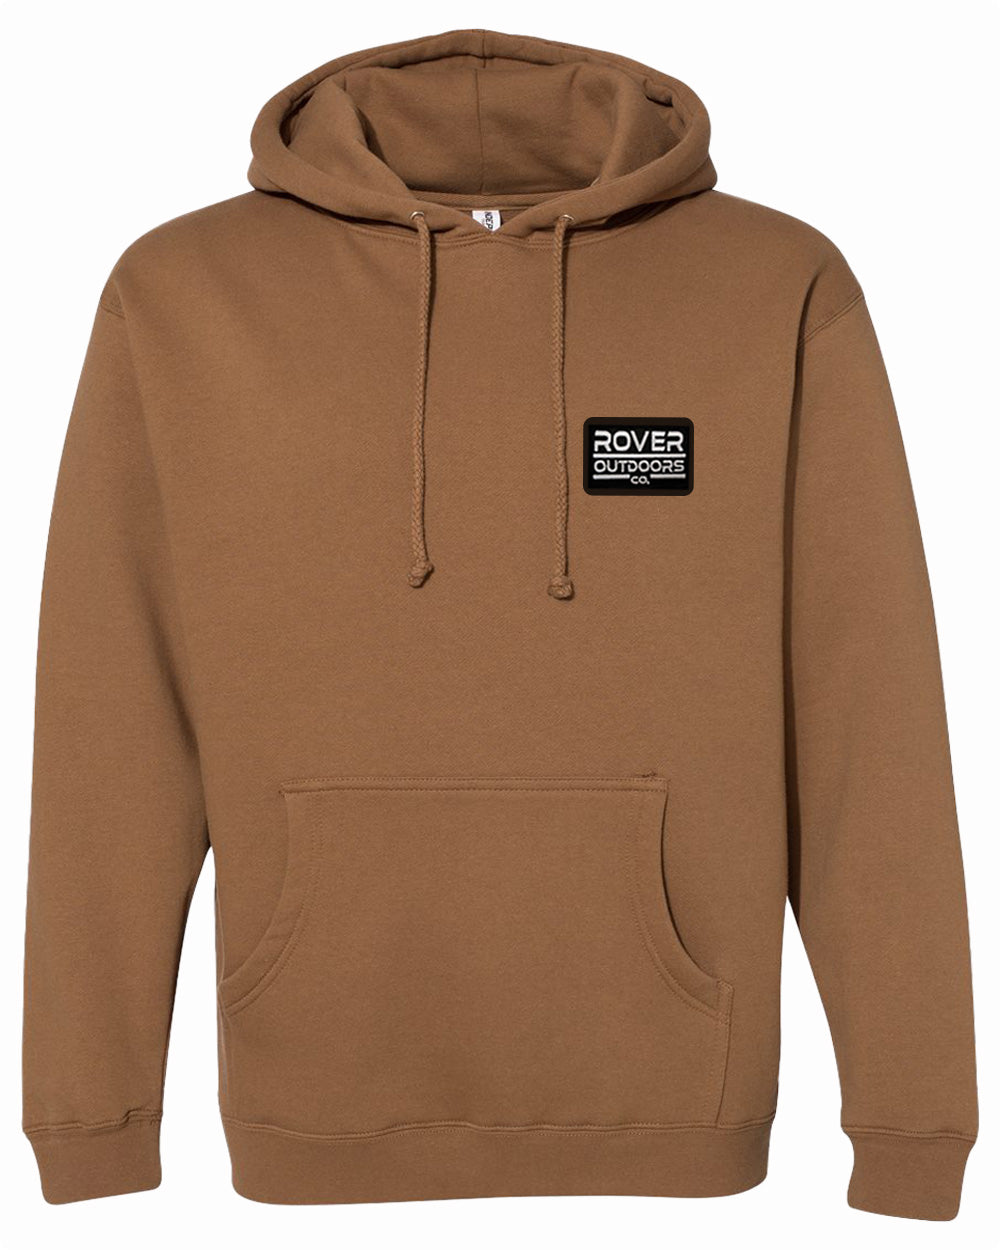 Rover Outdoors Co. Patch Hoodie Saddle Brown